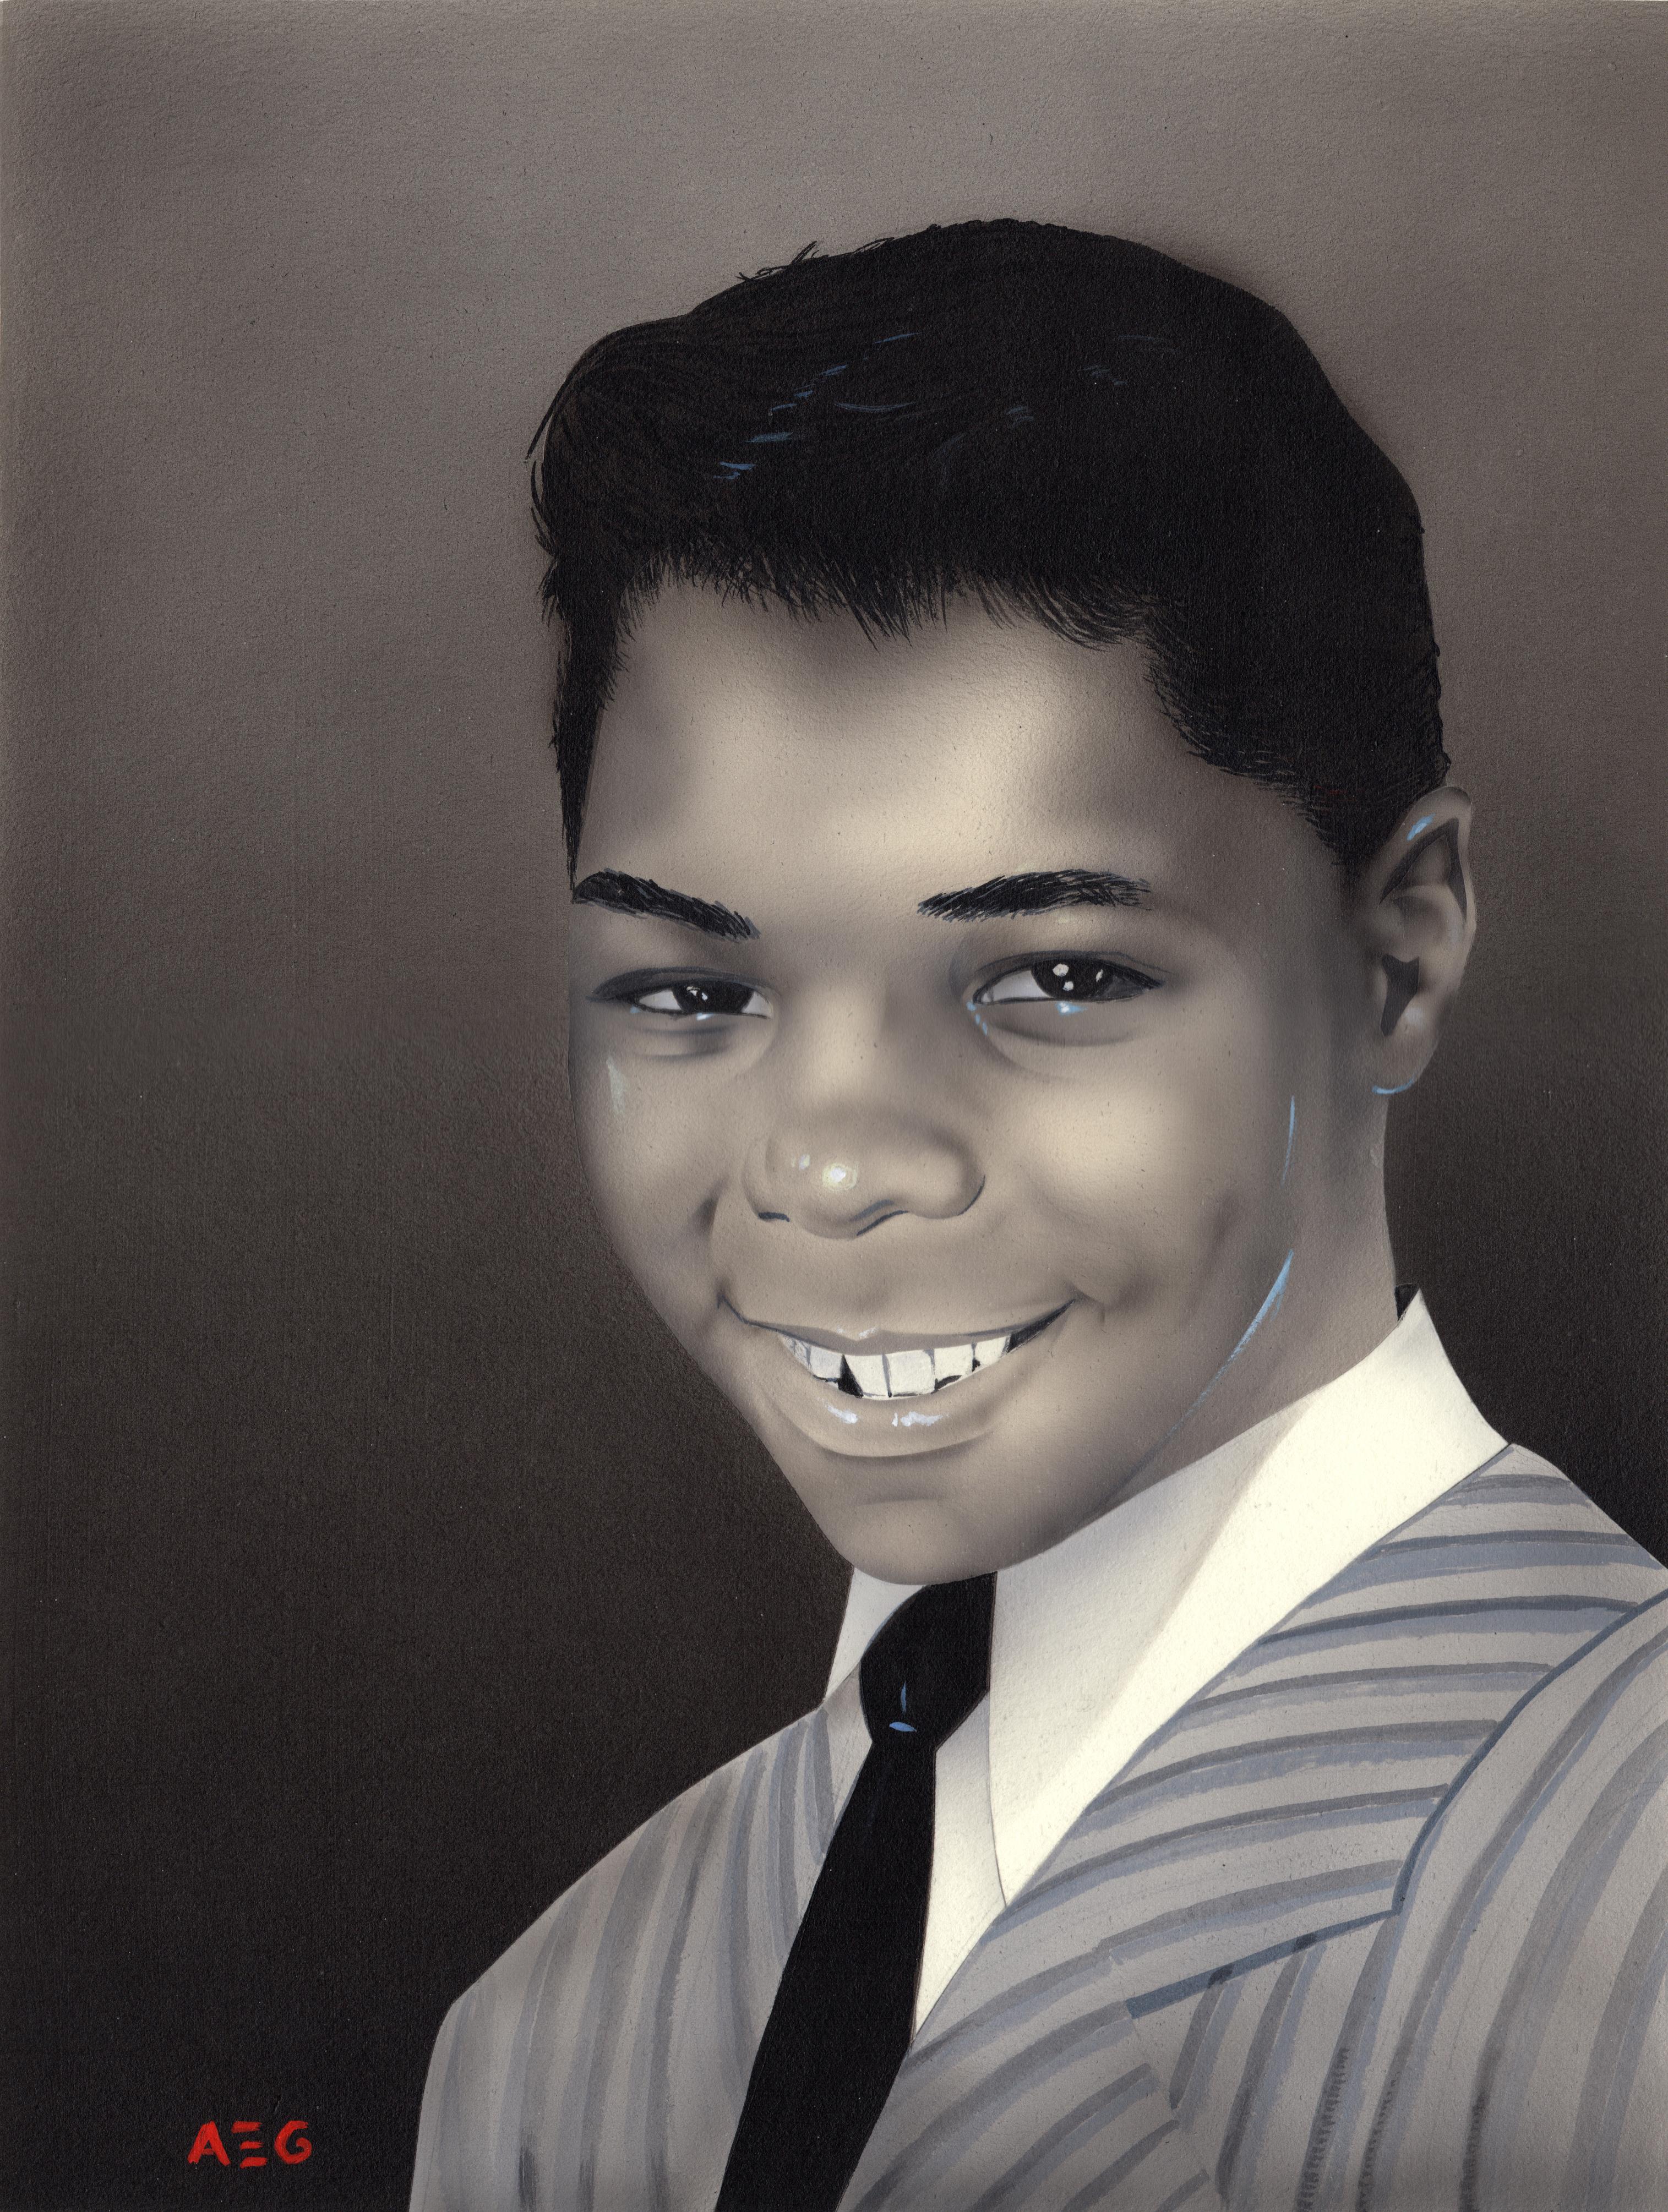 Teen Idol Frankie Lymon’s Tragic Rise and Fall Tells the Truth About 1950s America